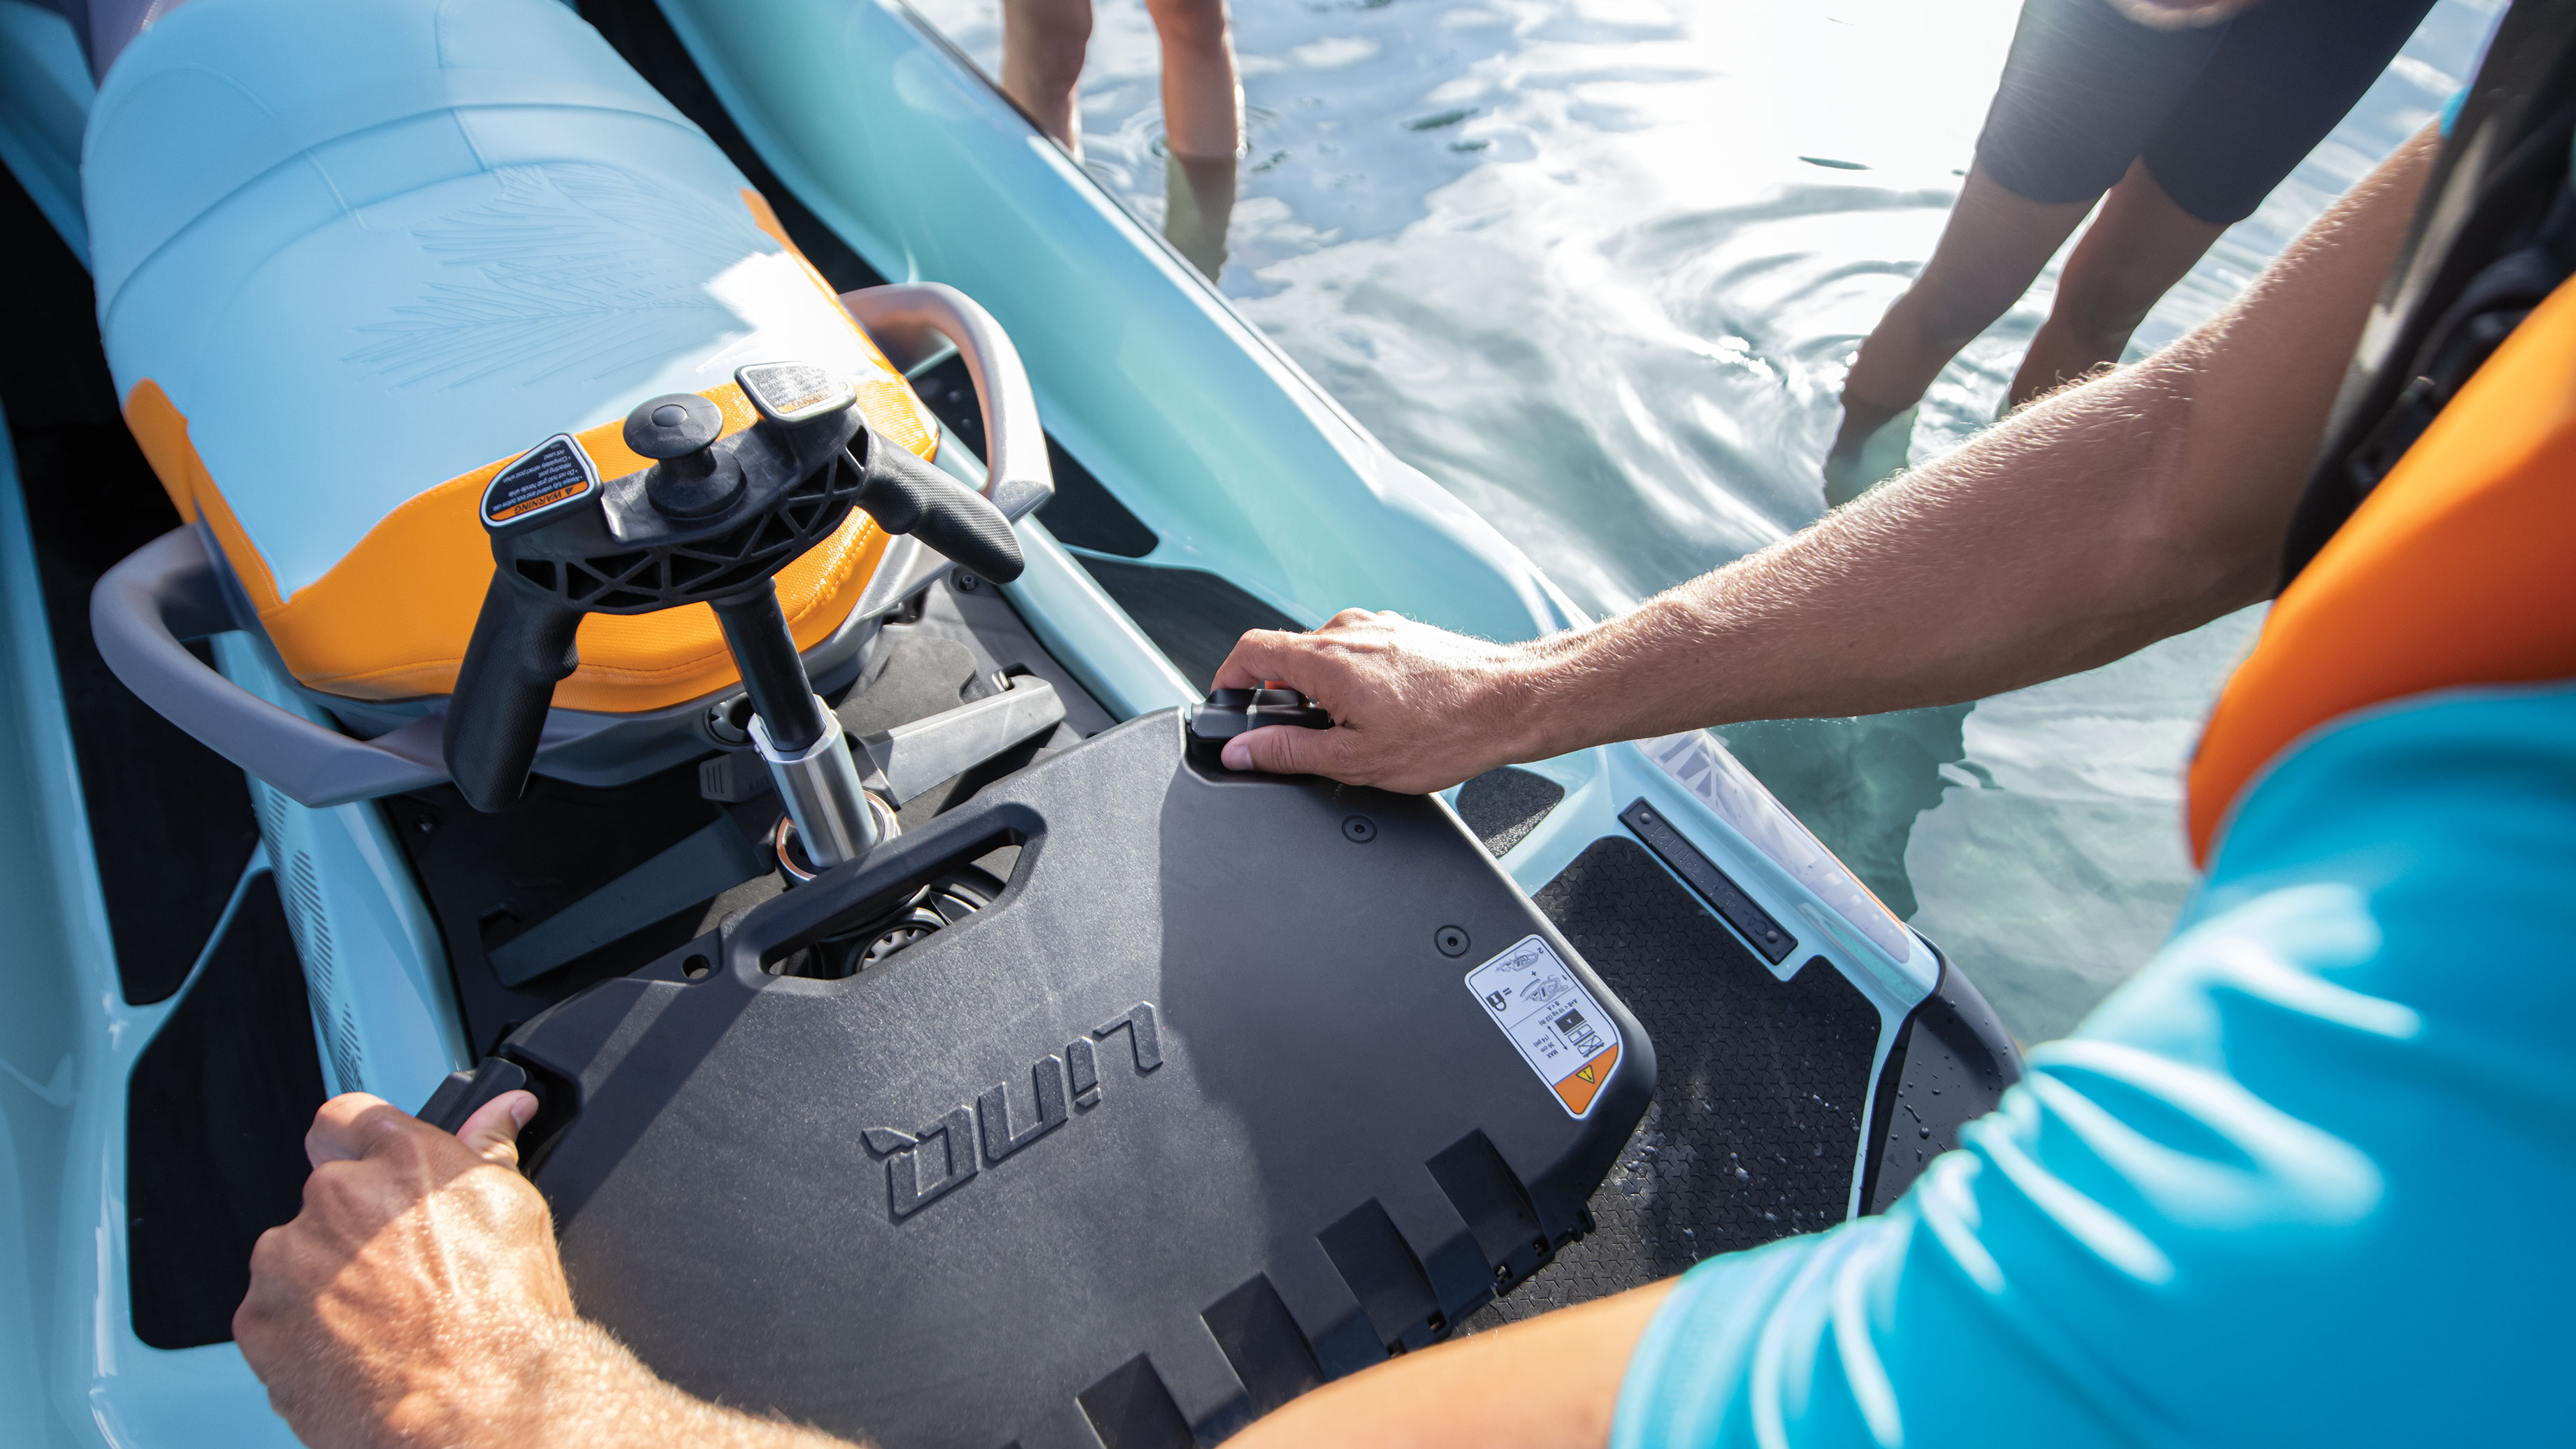 Your Ultimate Jet Ski Equipment & Accessory Guide